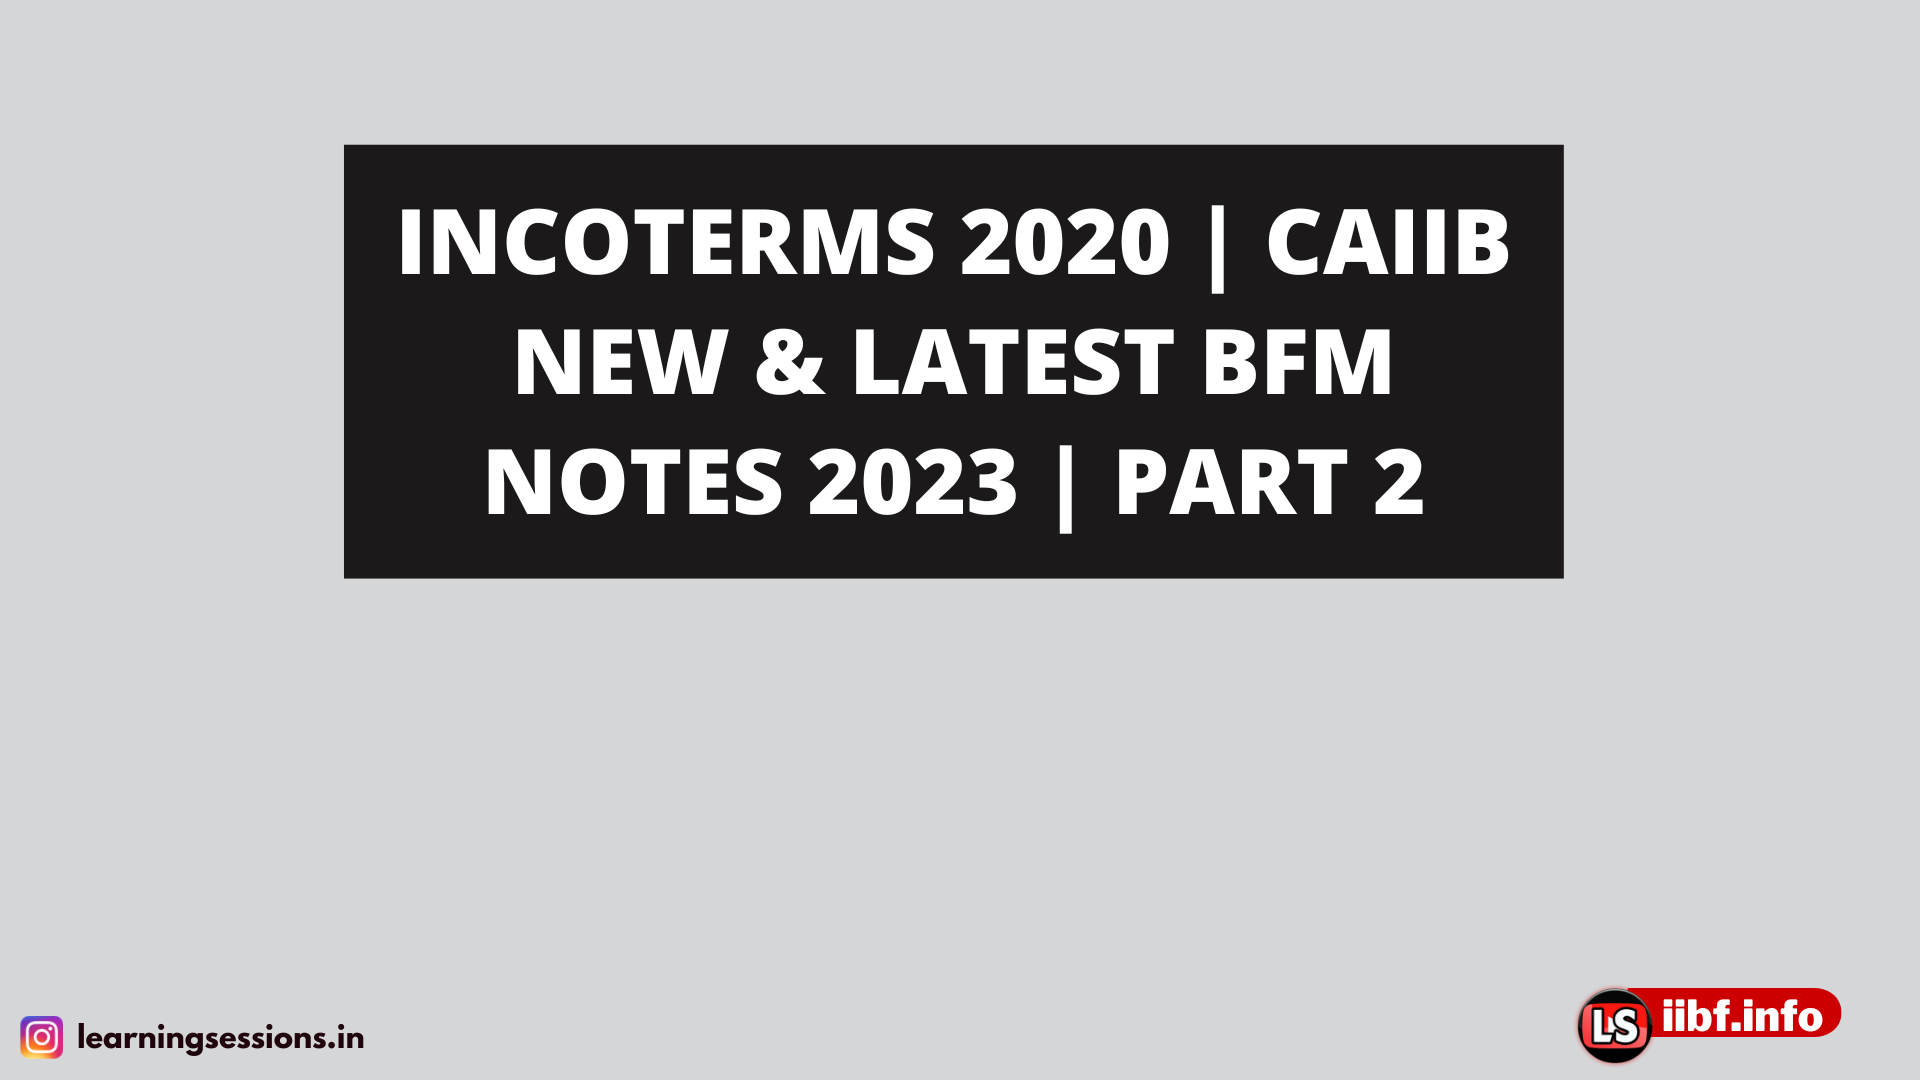 INCOTERMS 2020 | CAIIB NEW & LATEST BFM NOTES 2023 | PART 2